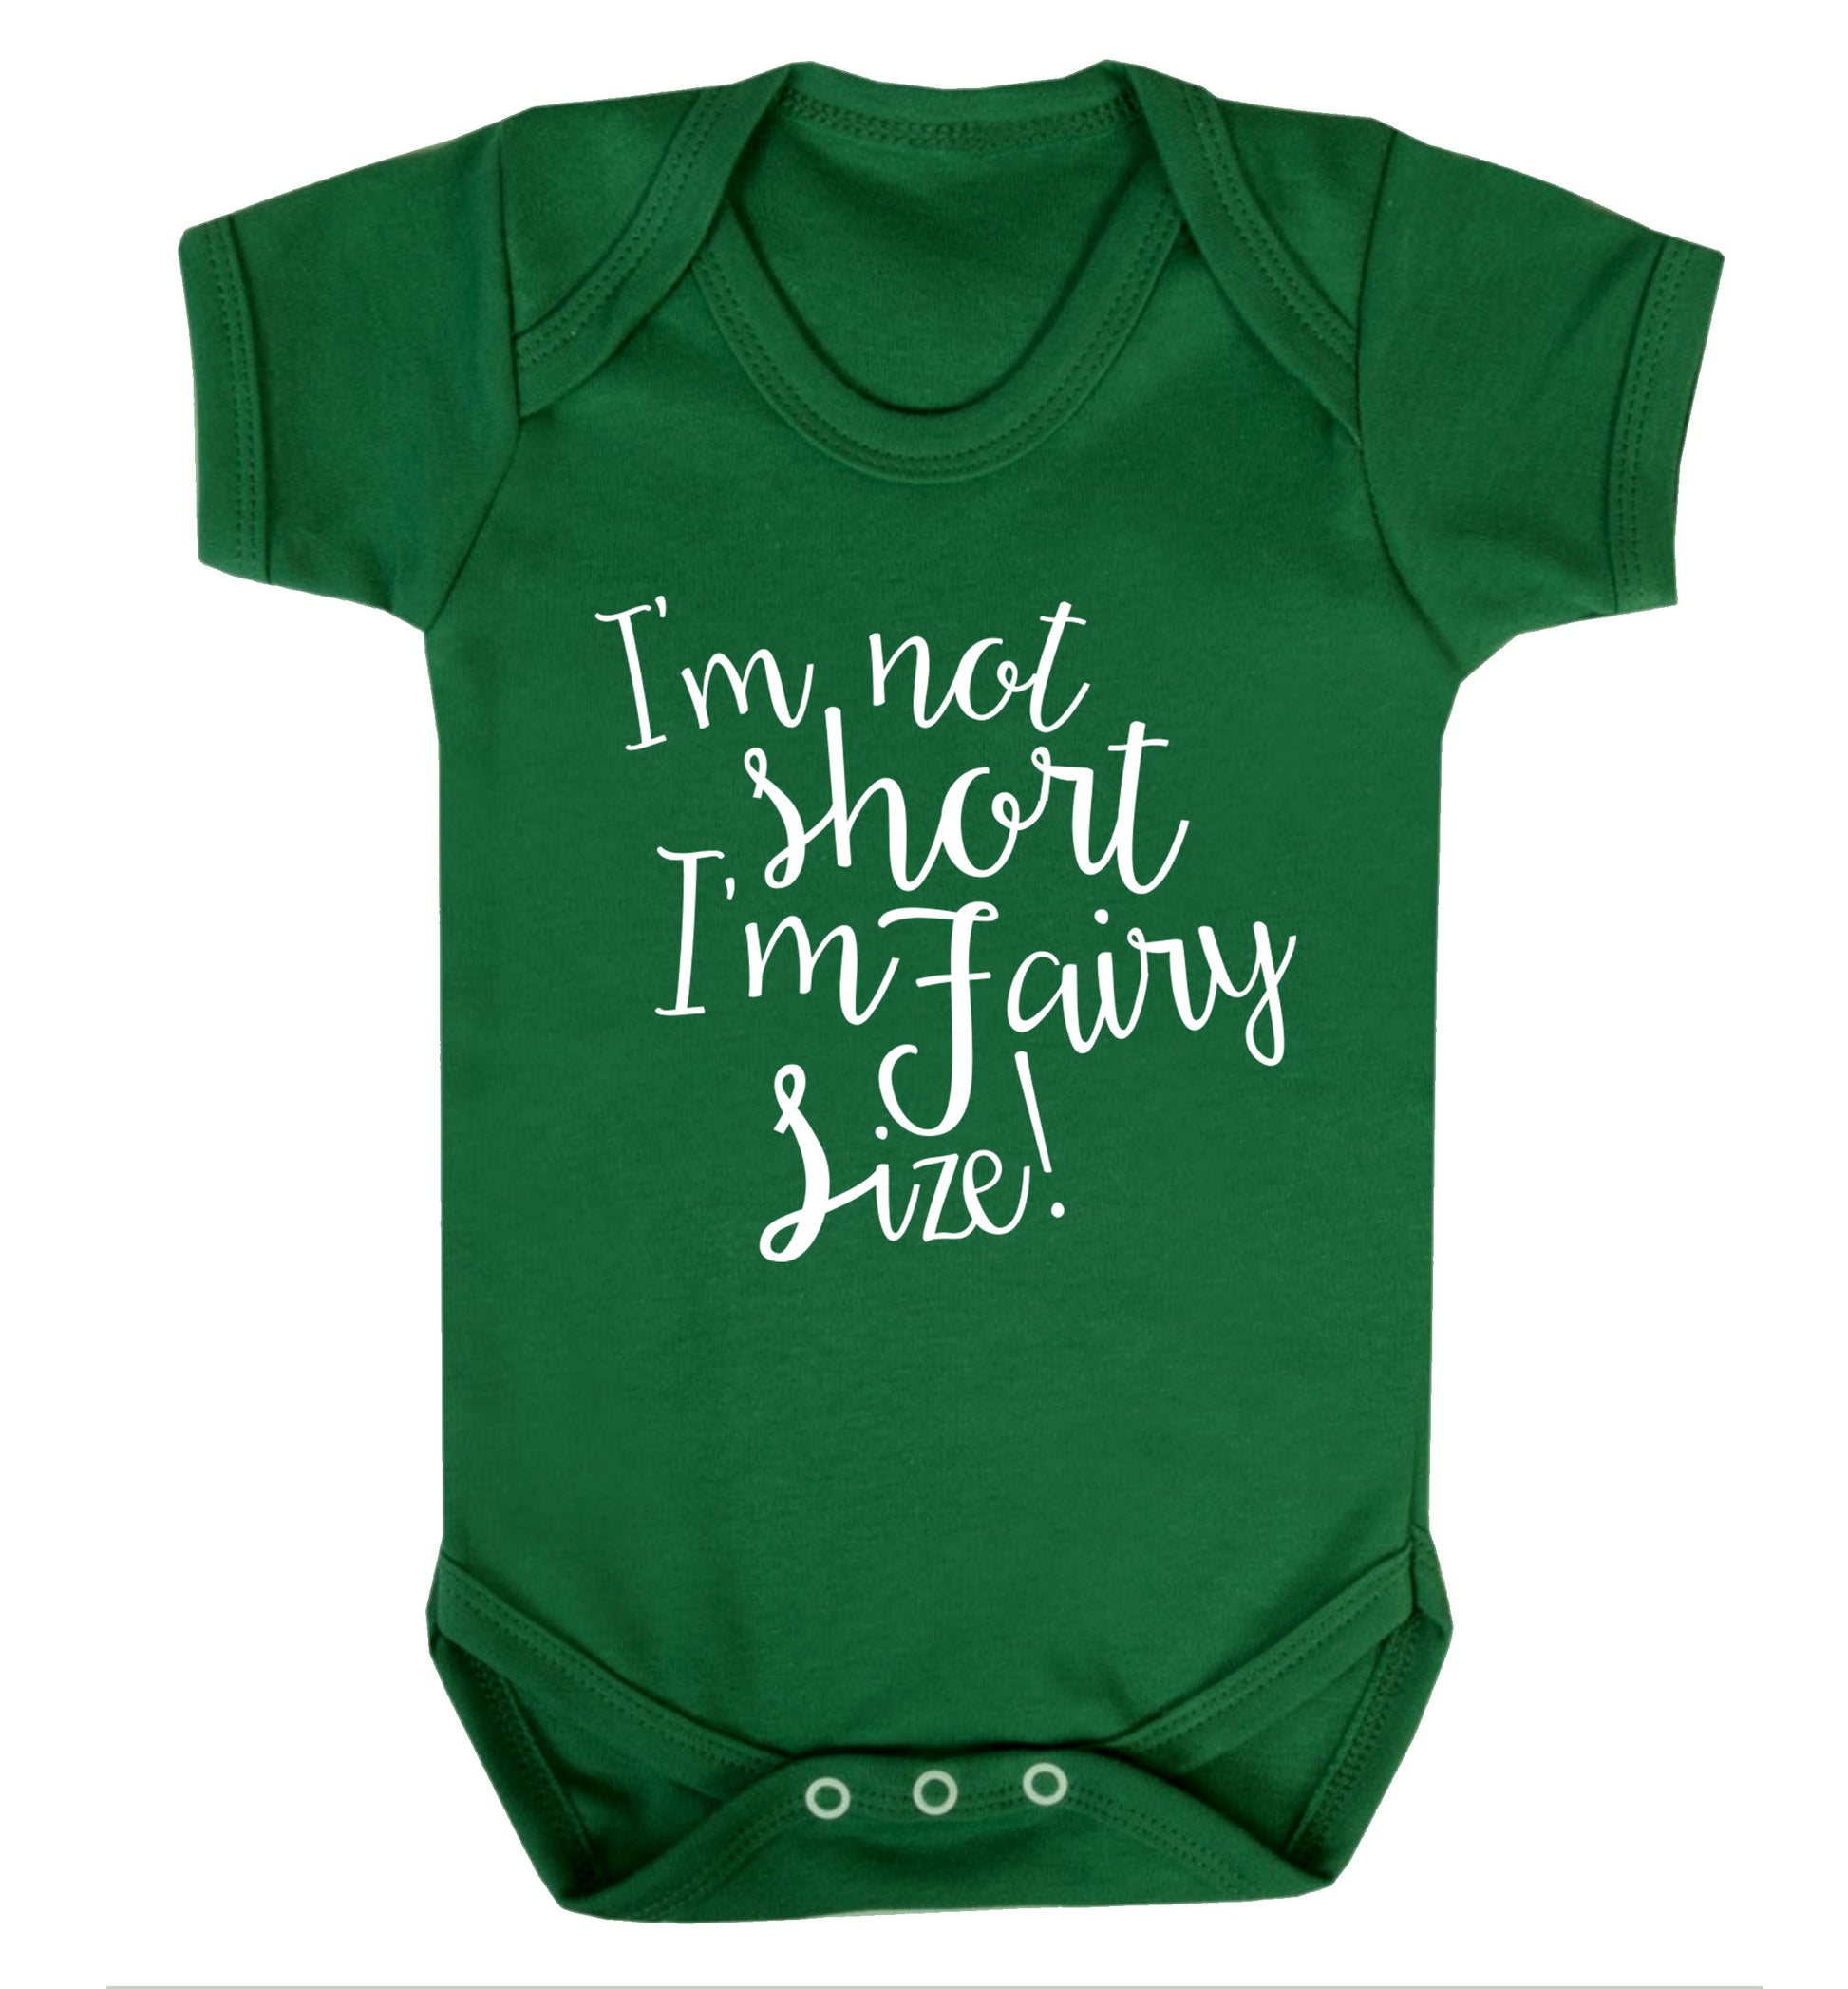 I'm not short I'm fairy sized! Baby Vest green 18-24 months